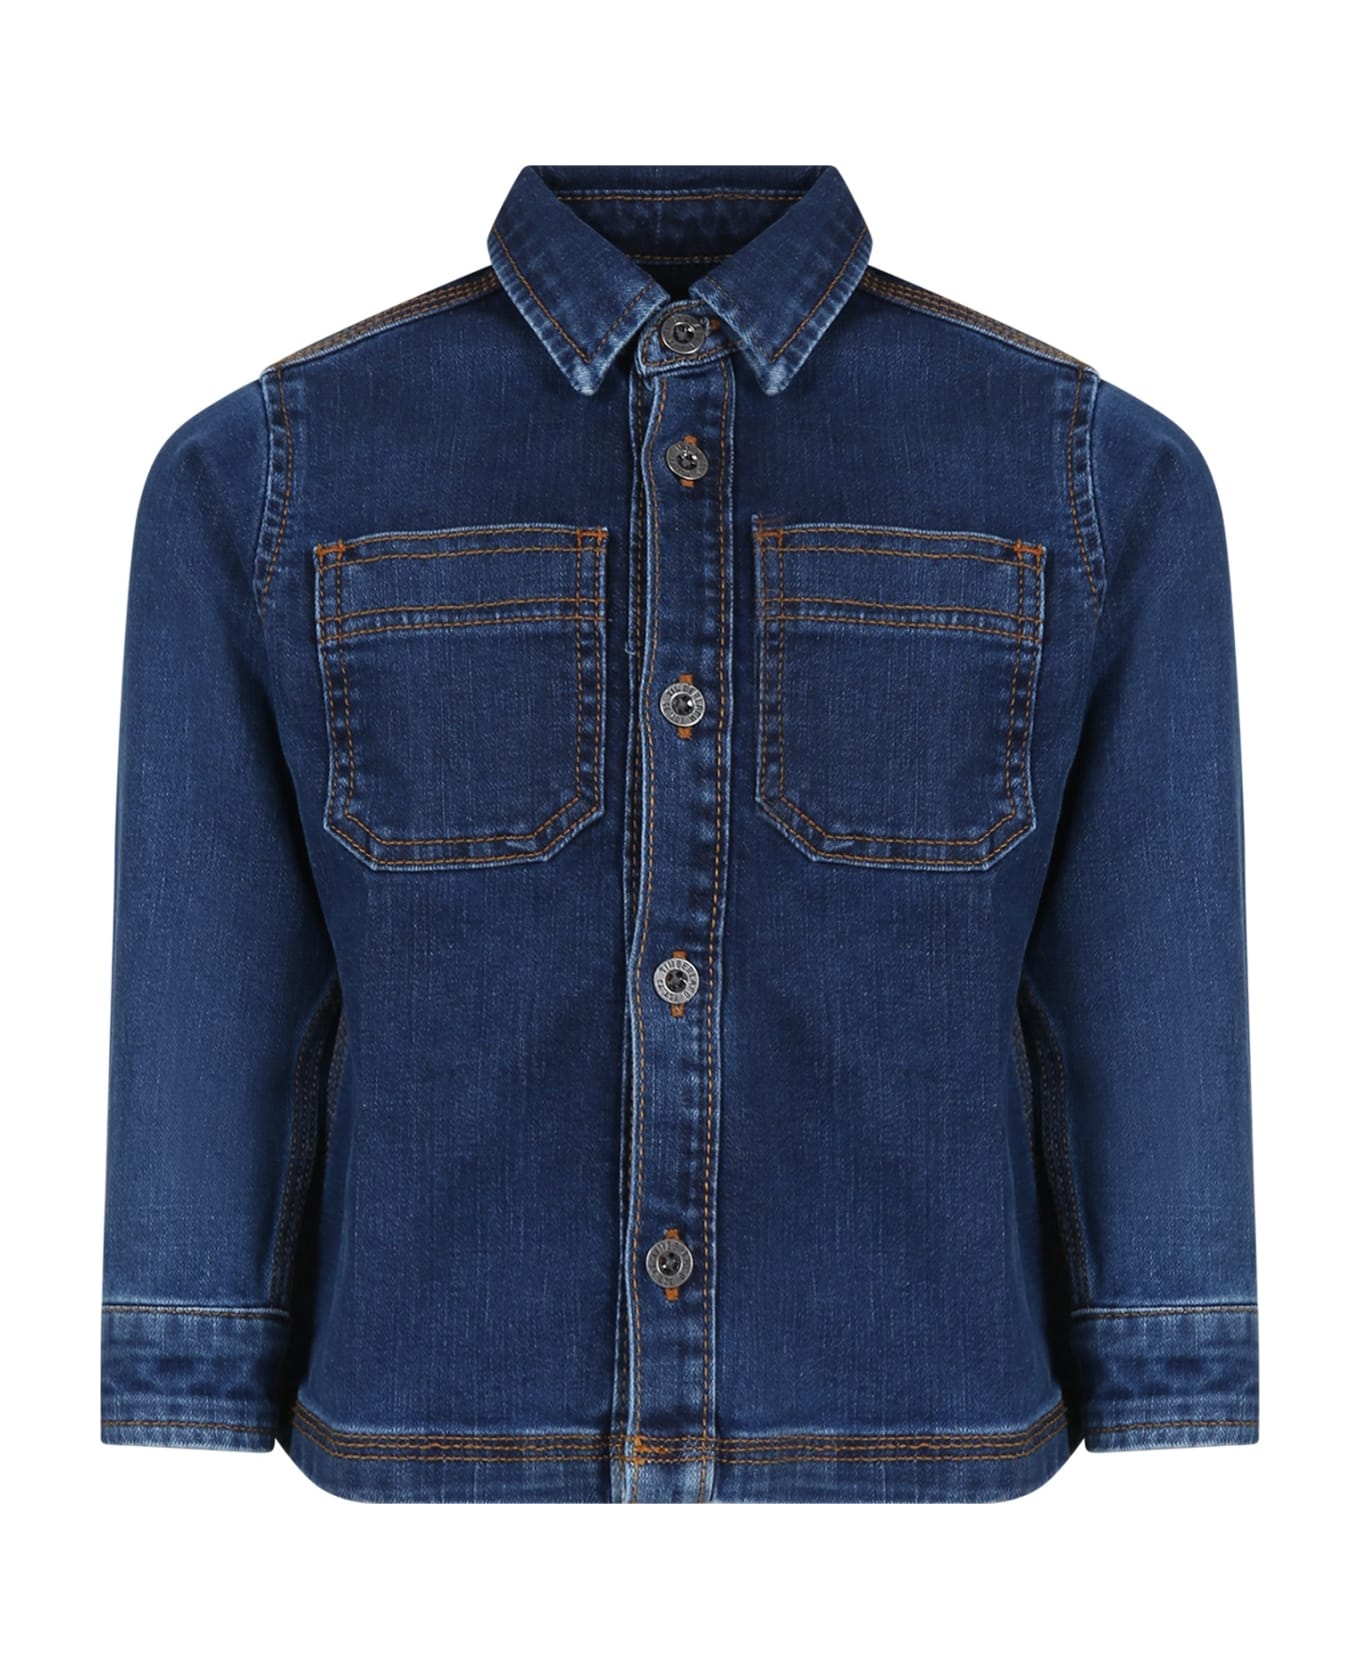 Timberland Blue Shirt For Boy With Patch - Denim